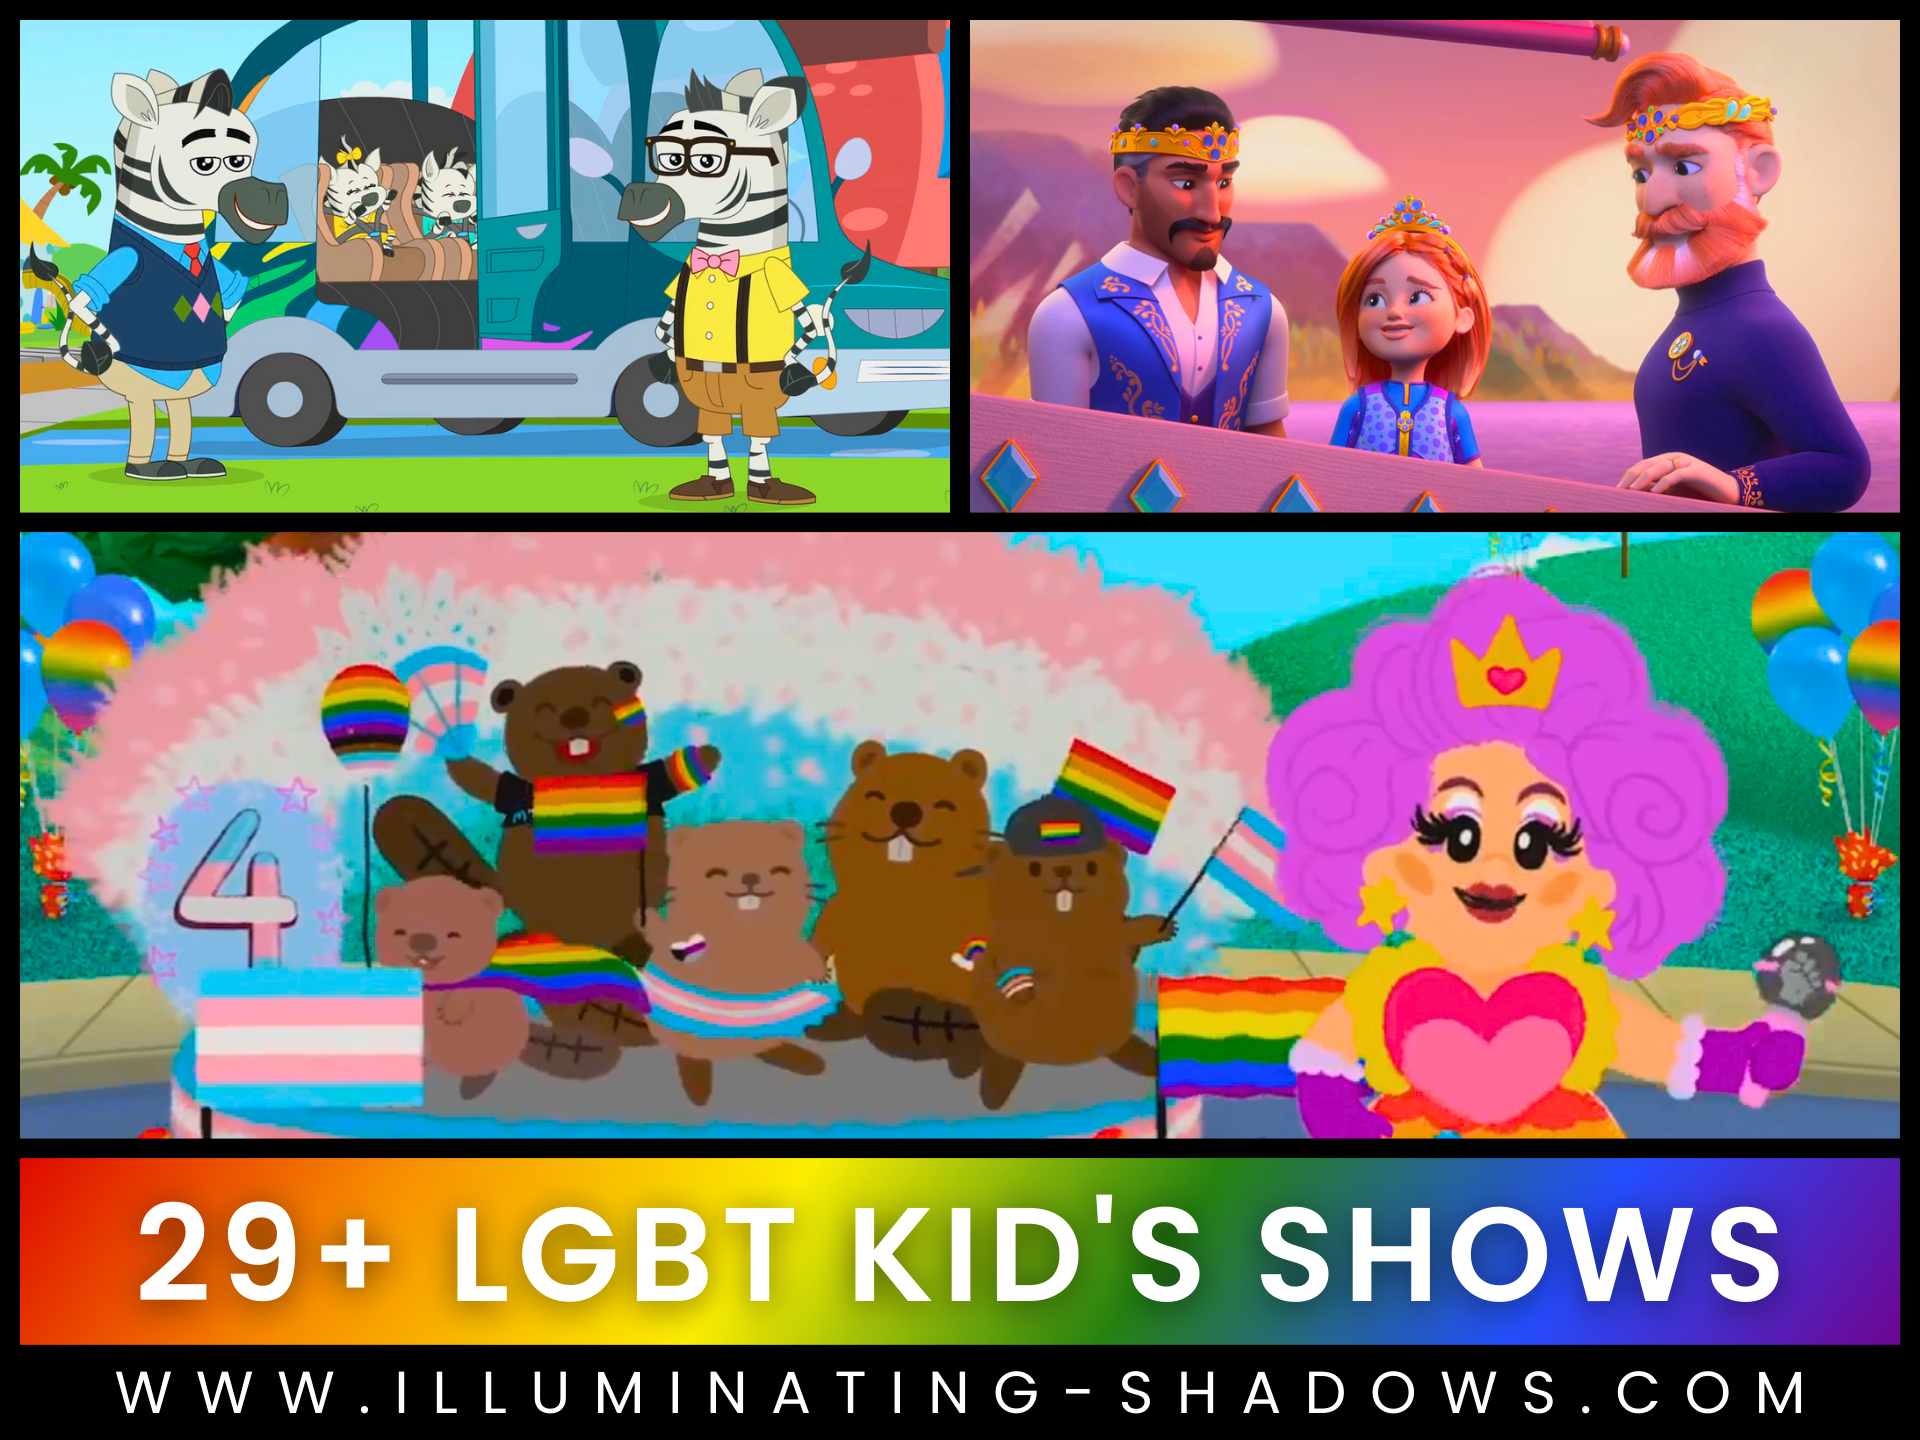 29+ LGBT Kid's Shows - Picture of LGBT characters from Blues Clues, Chip and Potato, and Princess Power